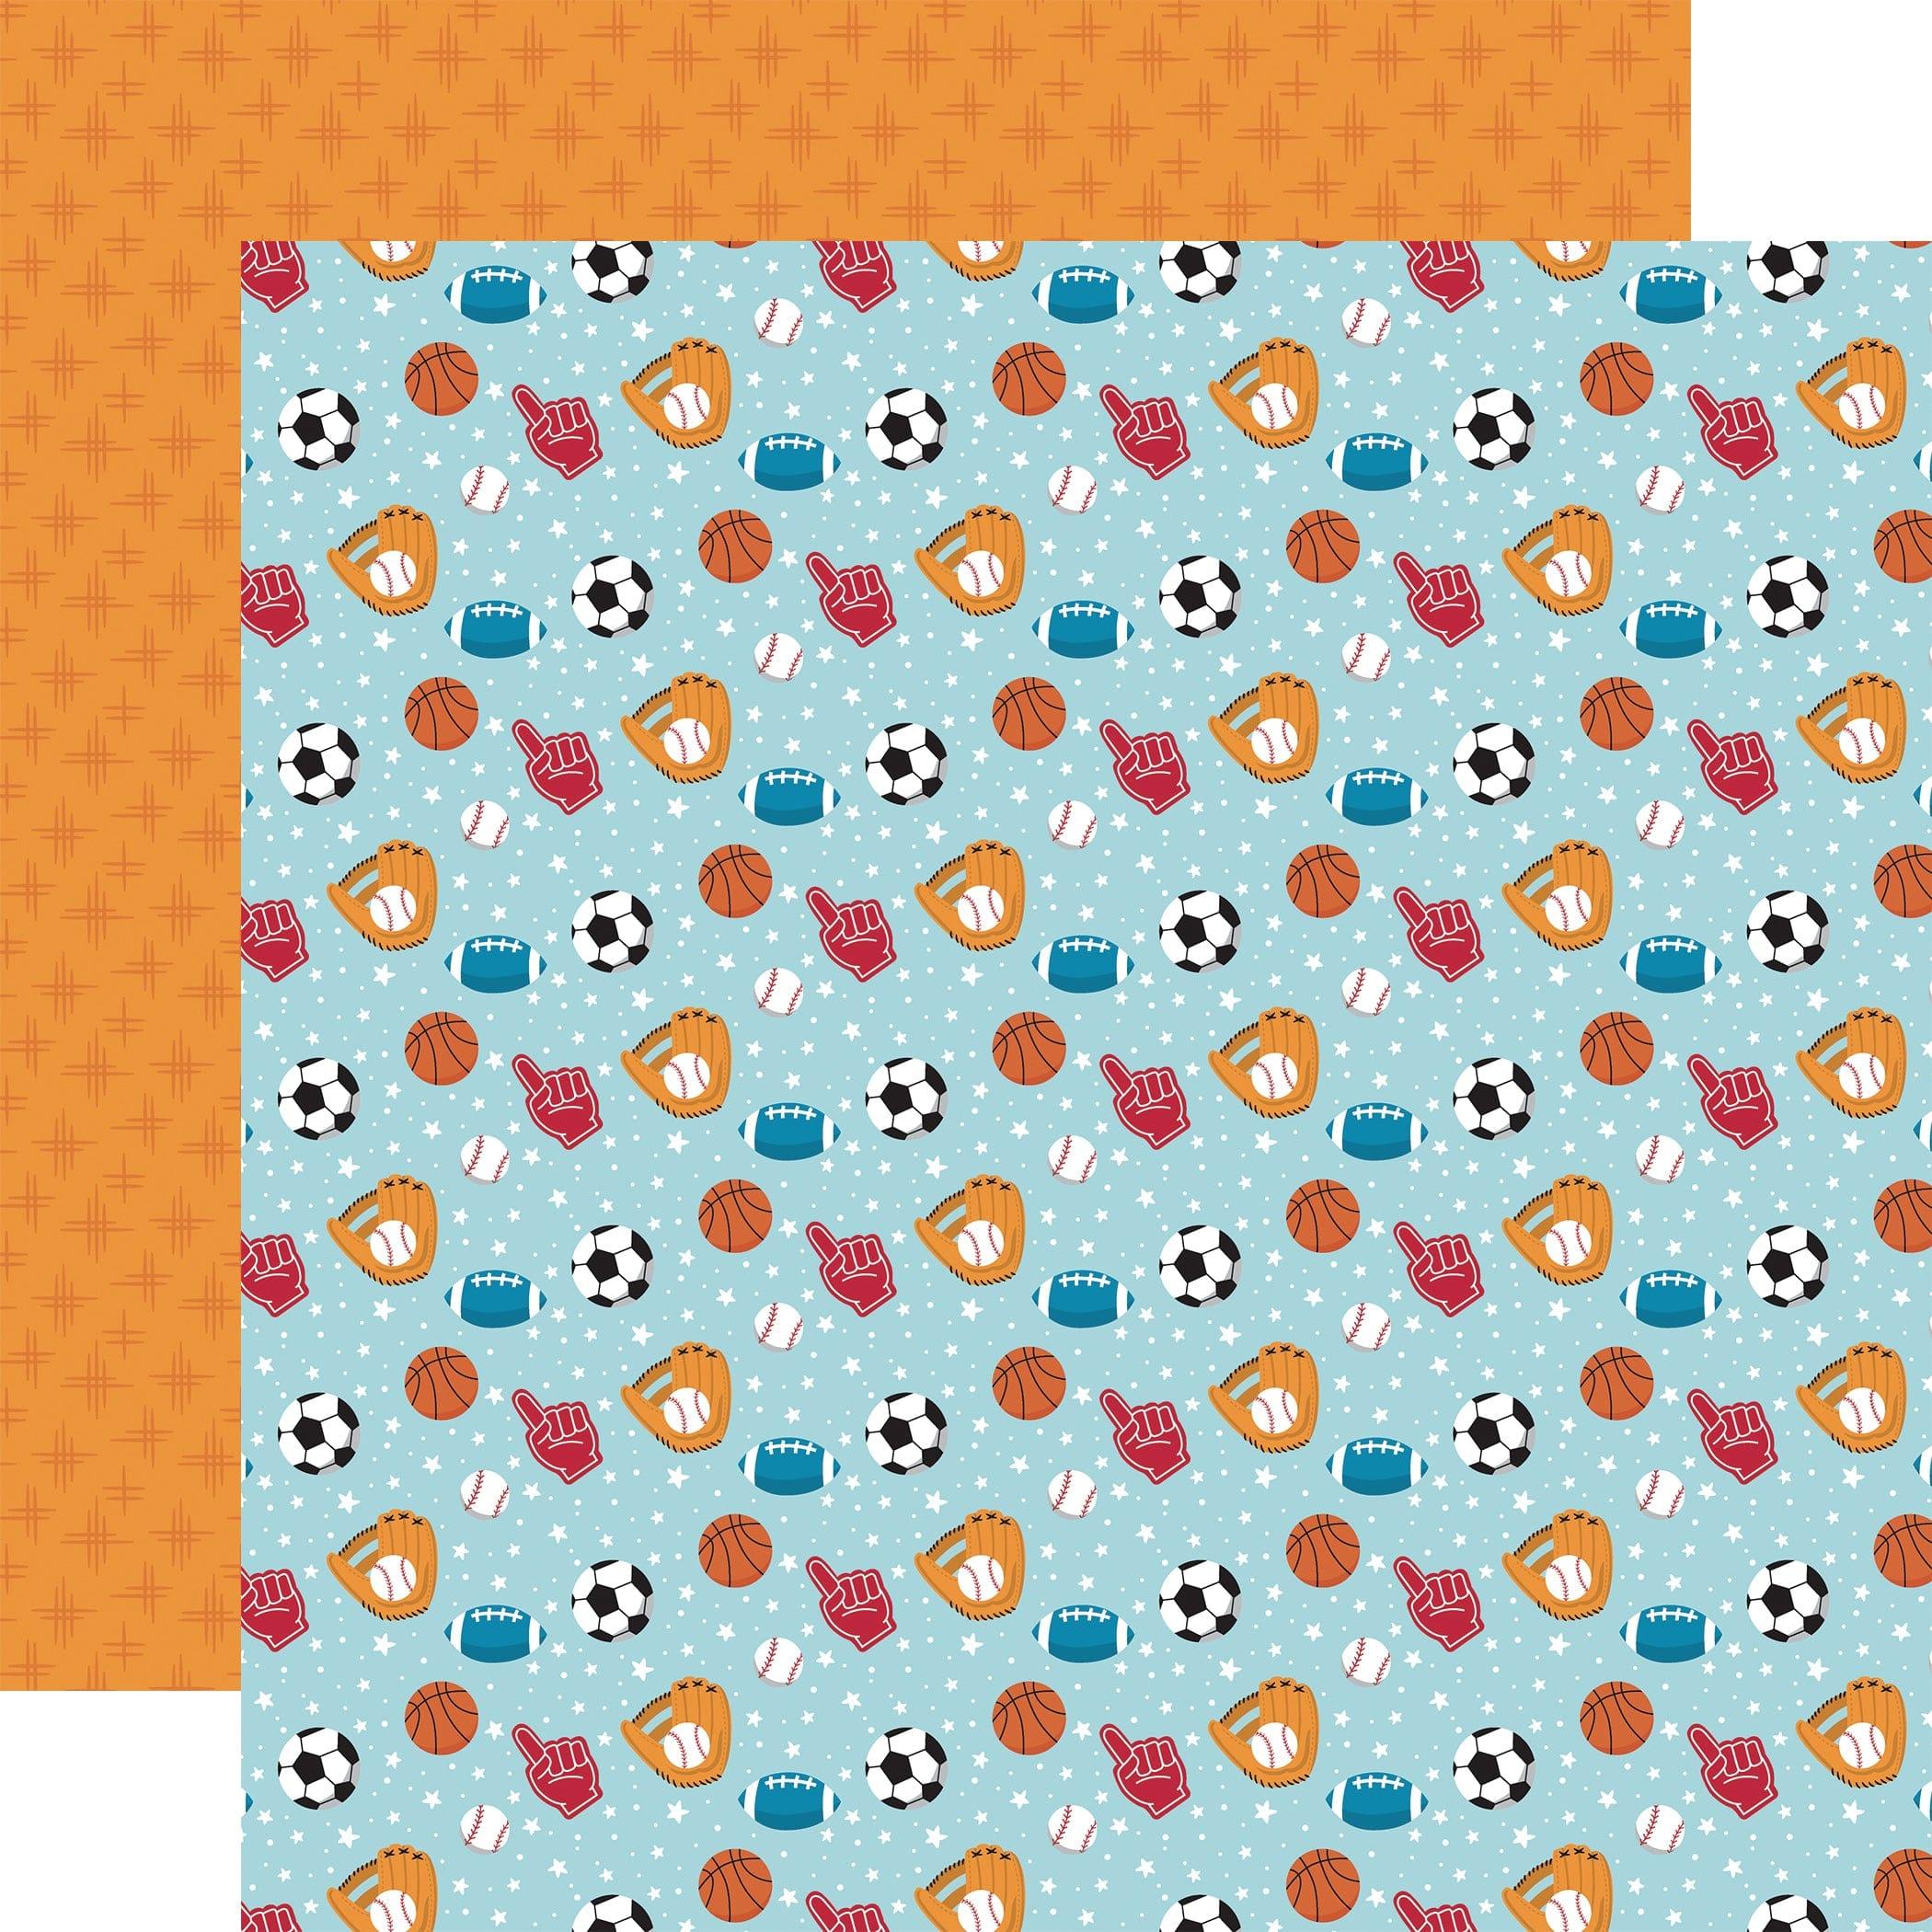 Play All Day Boy Collection Play Ball 12 x 12 Double-Sided Scrapbook Paper by Echo Park Paper - Scrapbook Supply Companies